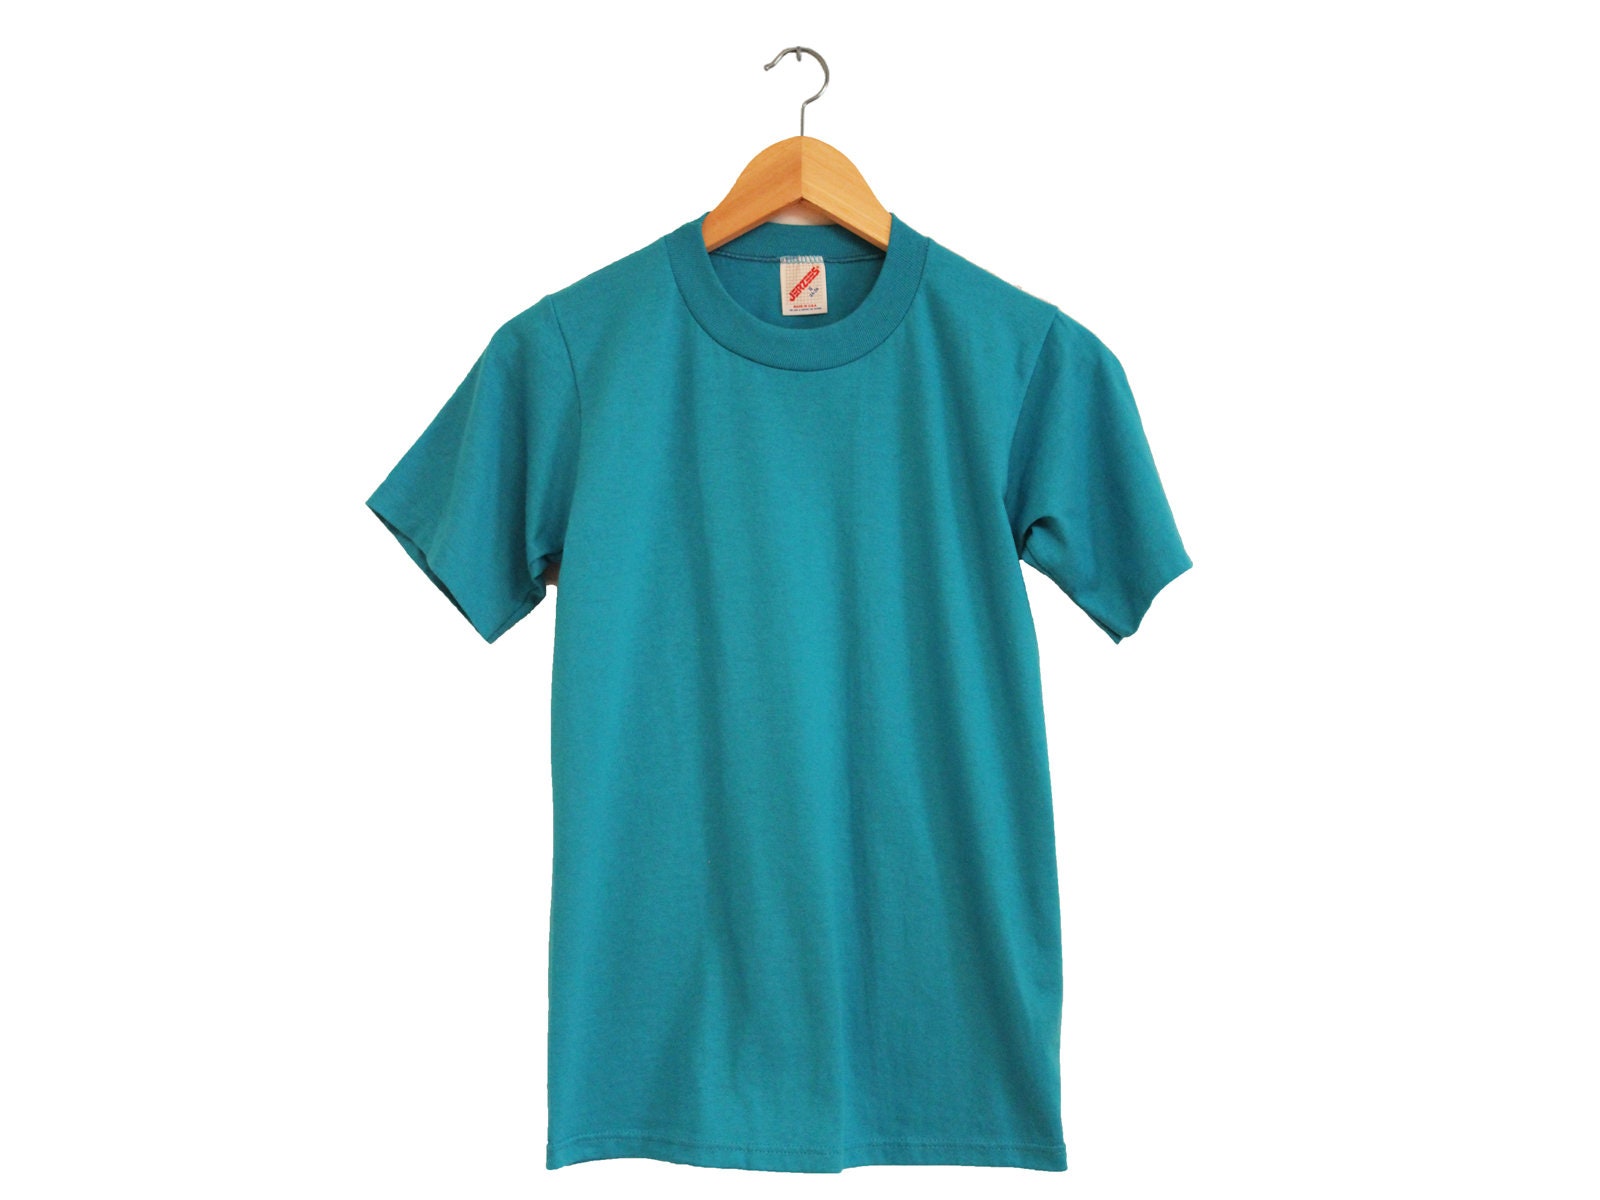 succes bomuld Populær Vintage T Shirt Green / Teal Blank Shirt 80s / Small / S / - Etsy